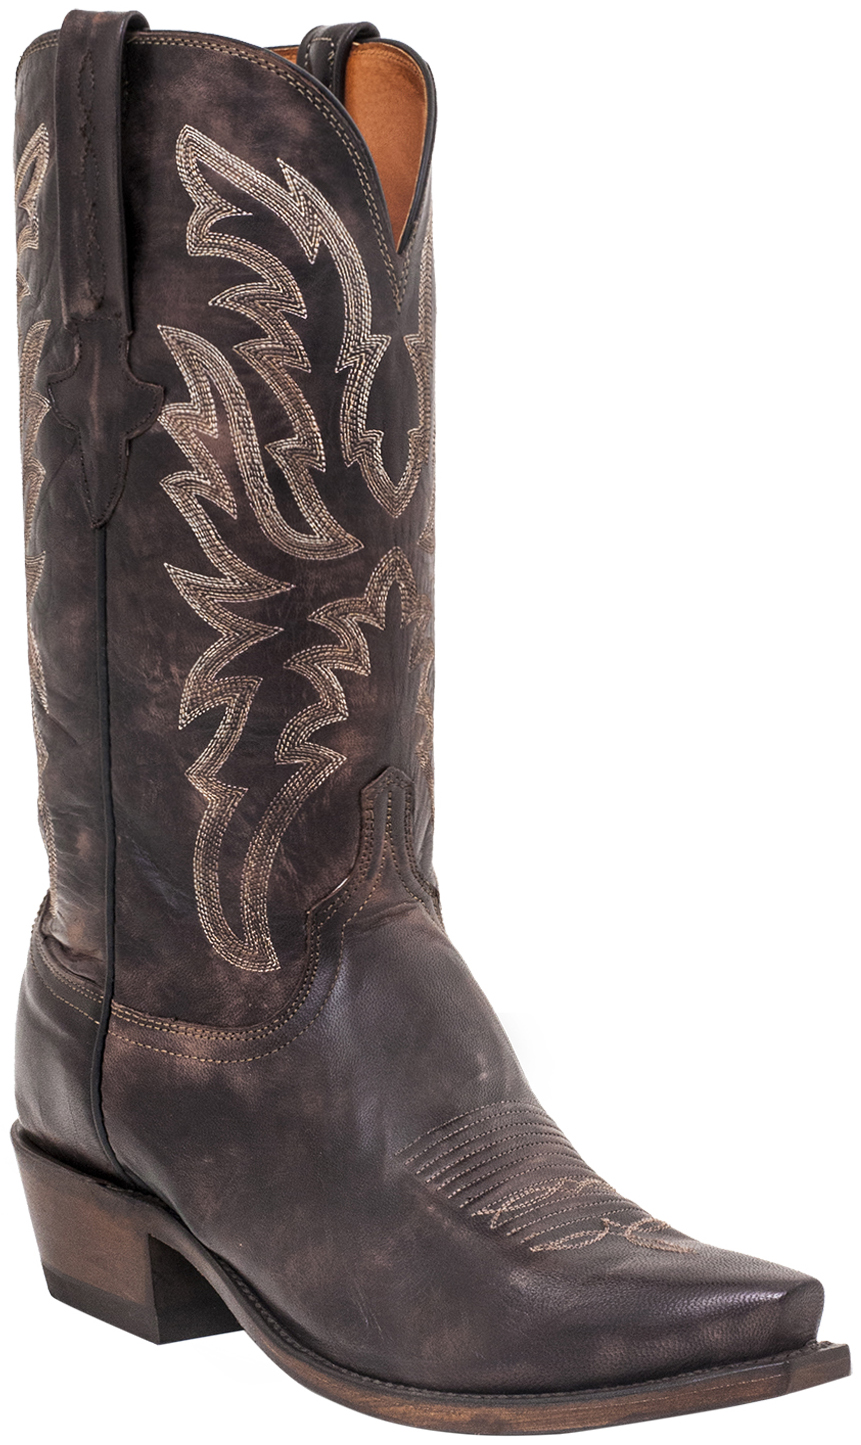 Lucchese Men's Milo Western Boots Snip Toe Sheplers